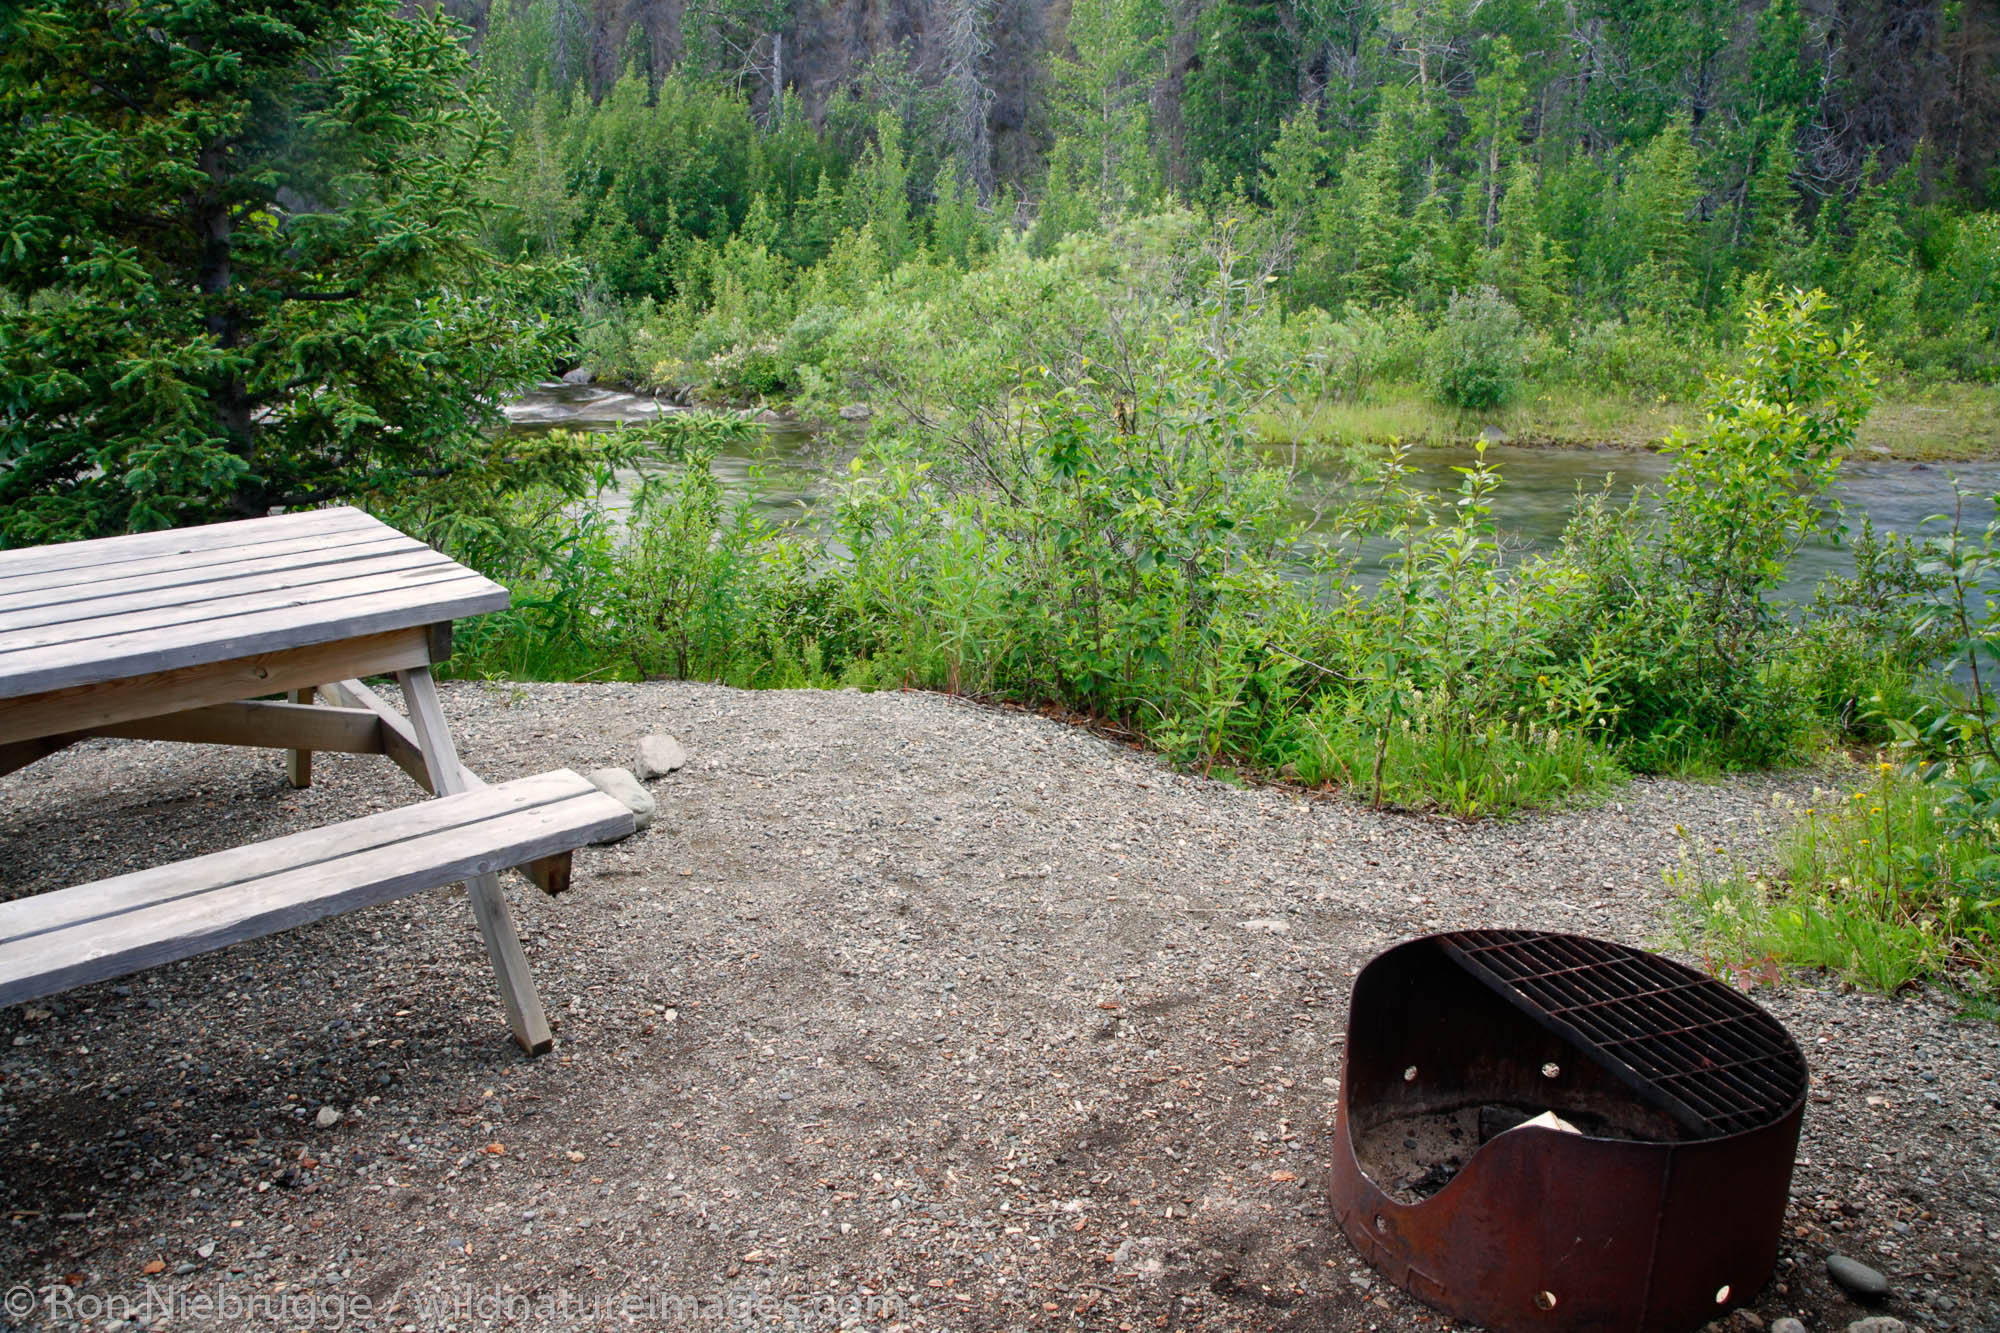 Million Dollar Falls Campground along the Haines Highway, Yukon Territory, Canada.